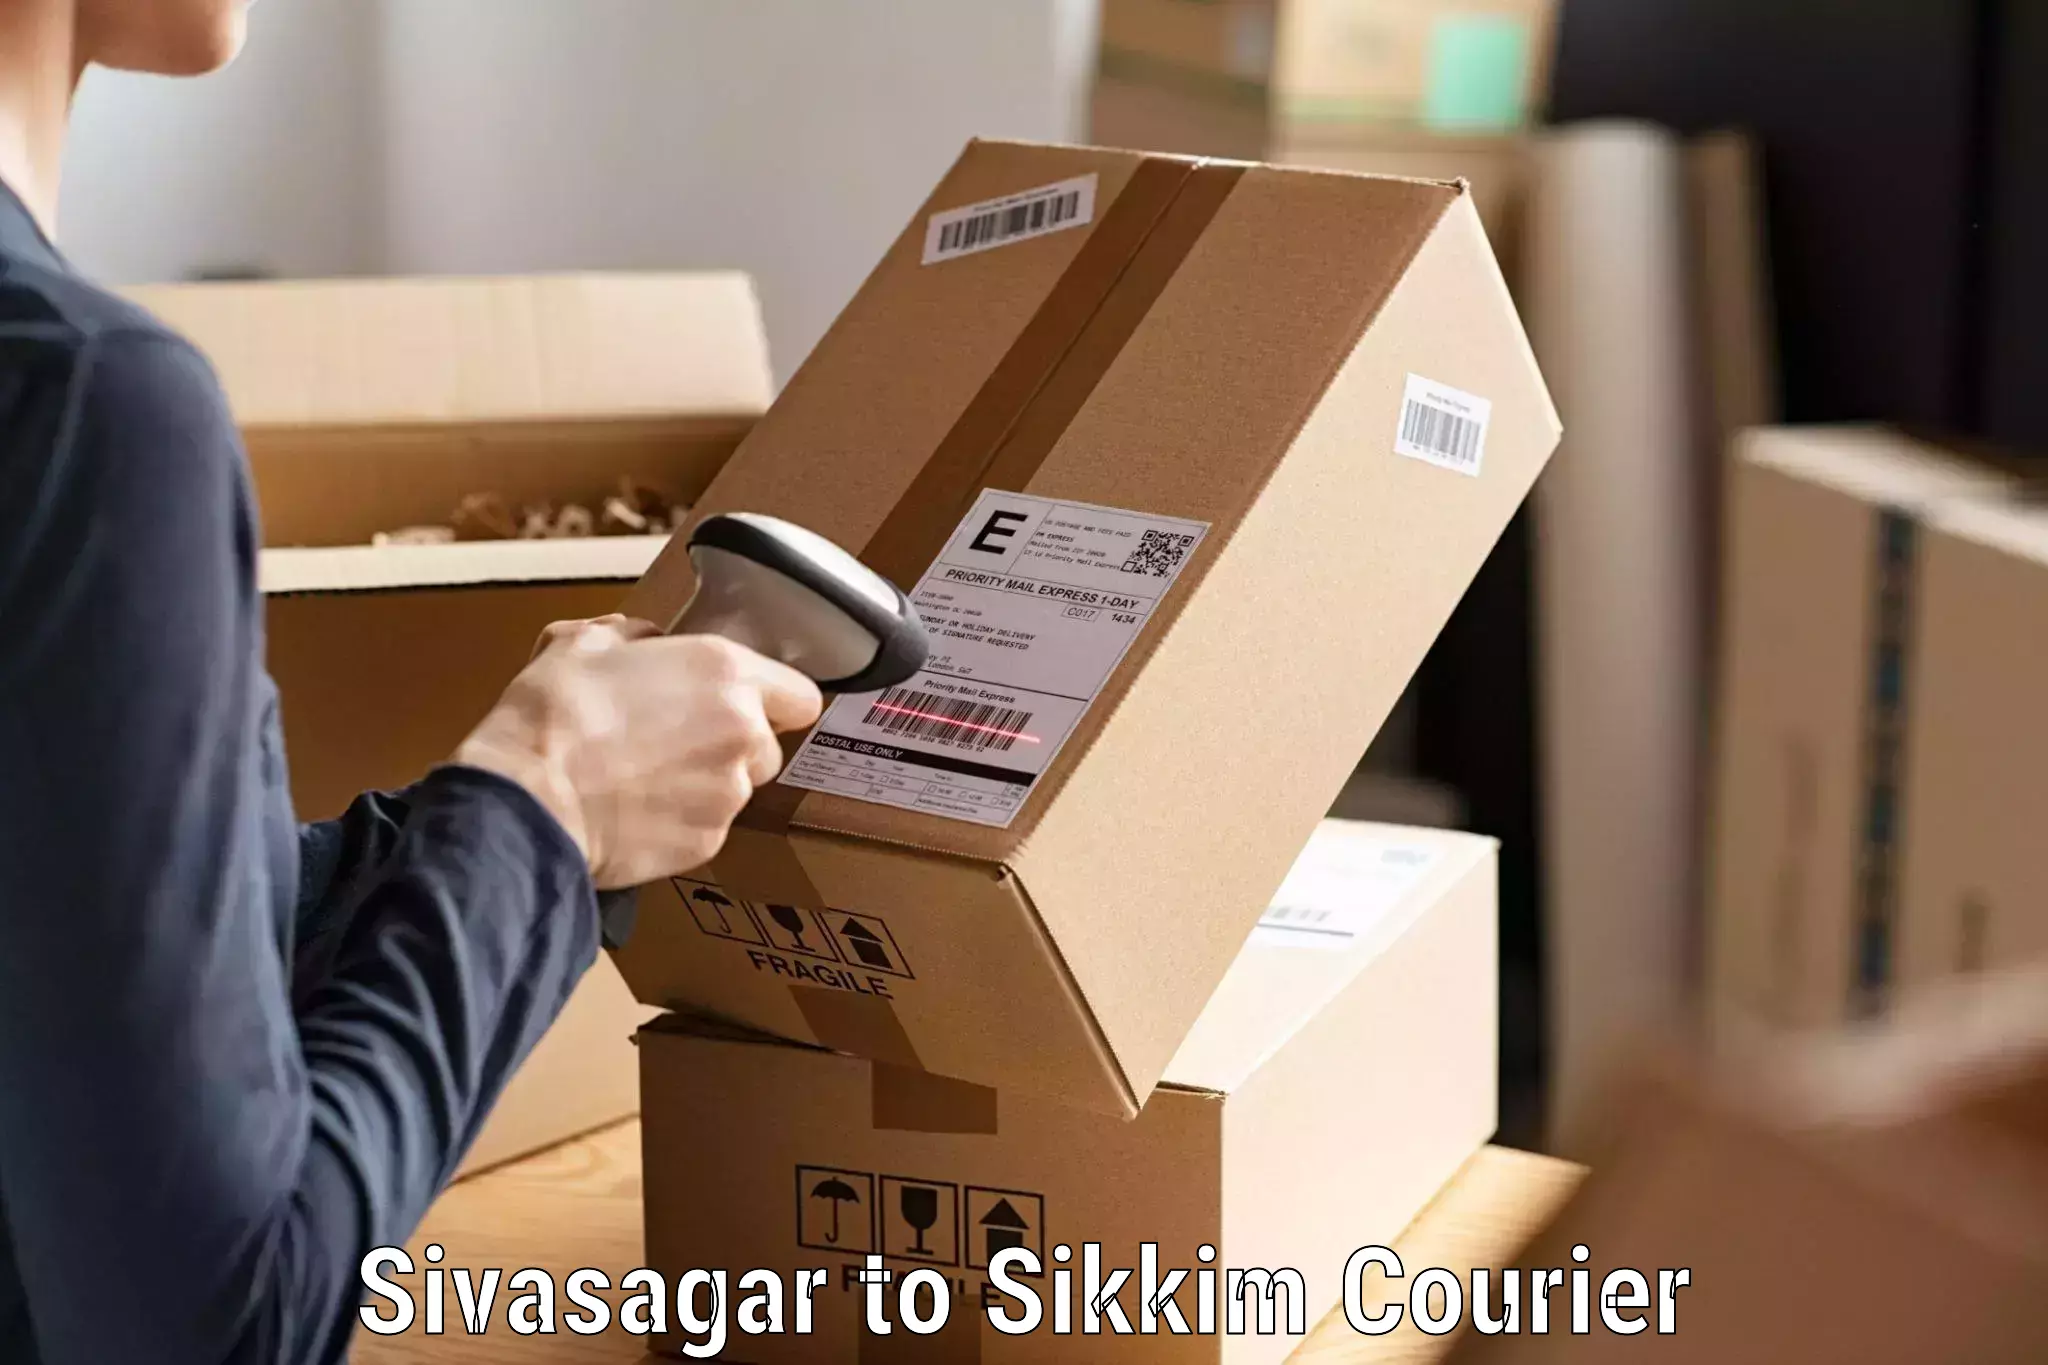 Affordable parcel rates Sivasagar to Pelling